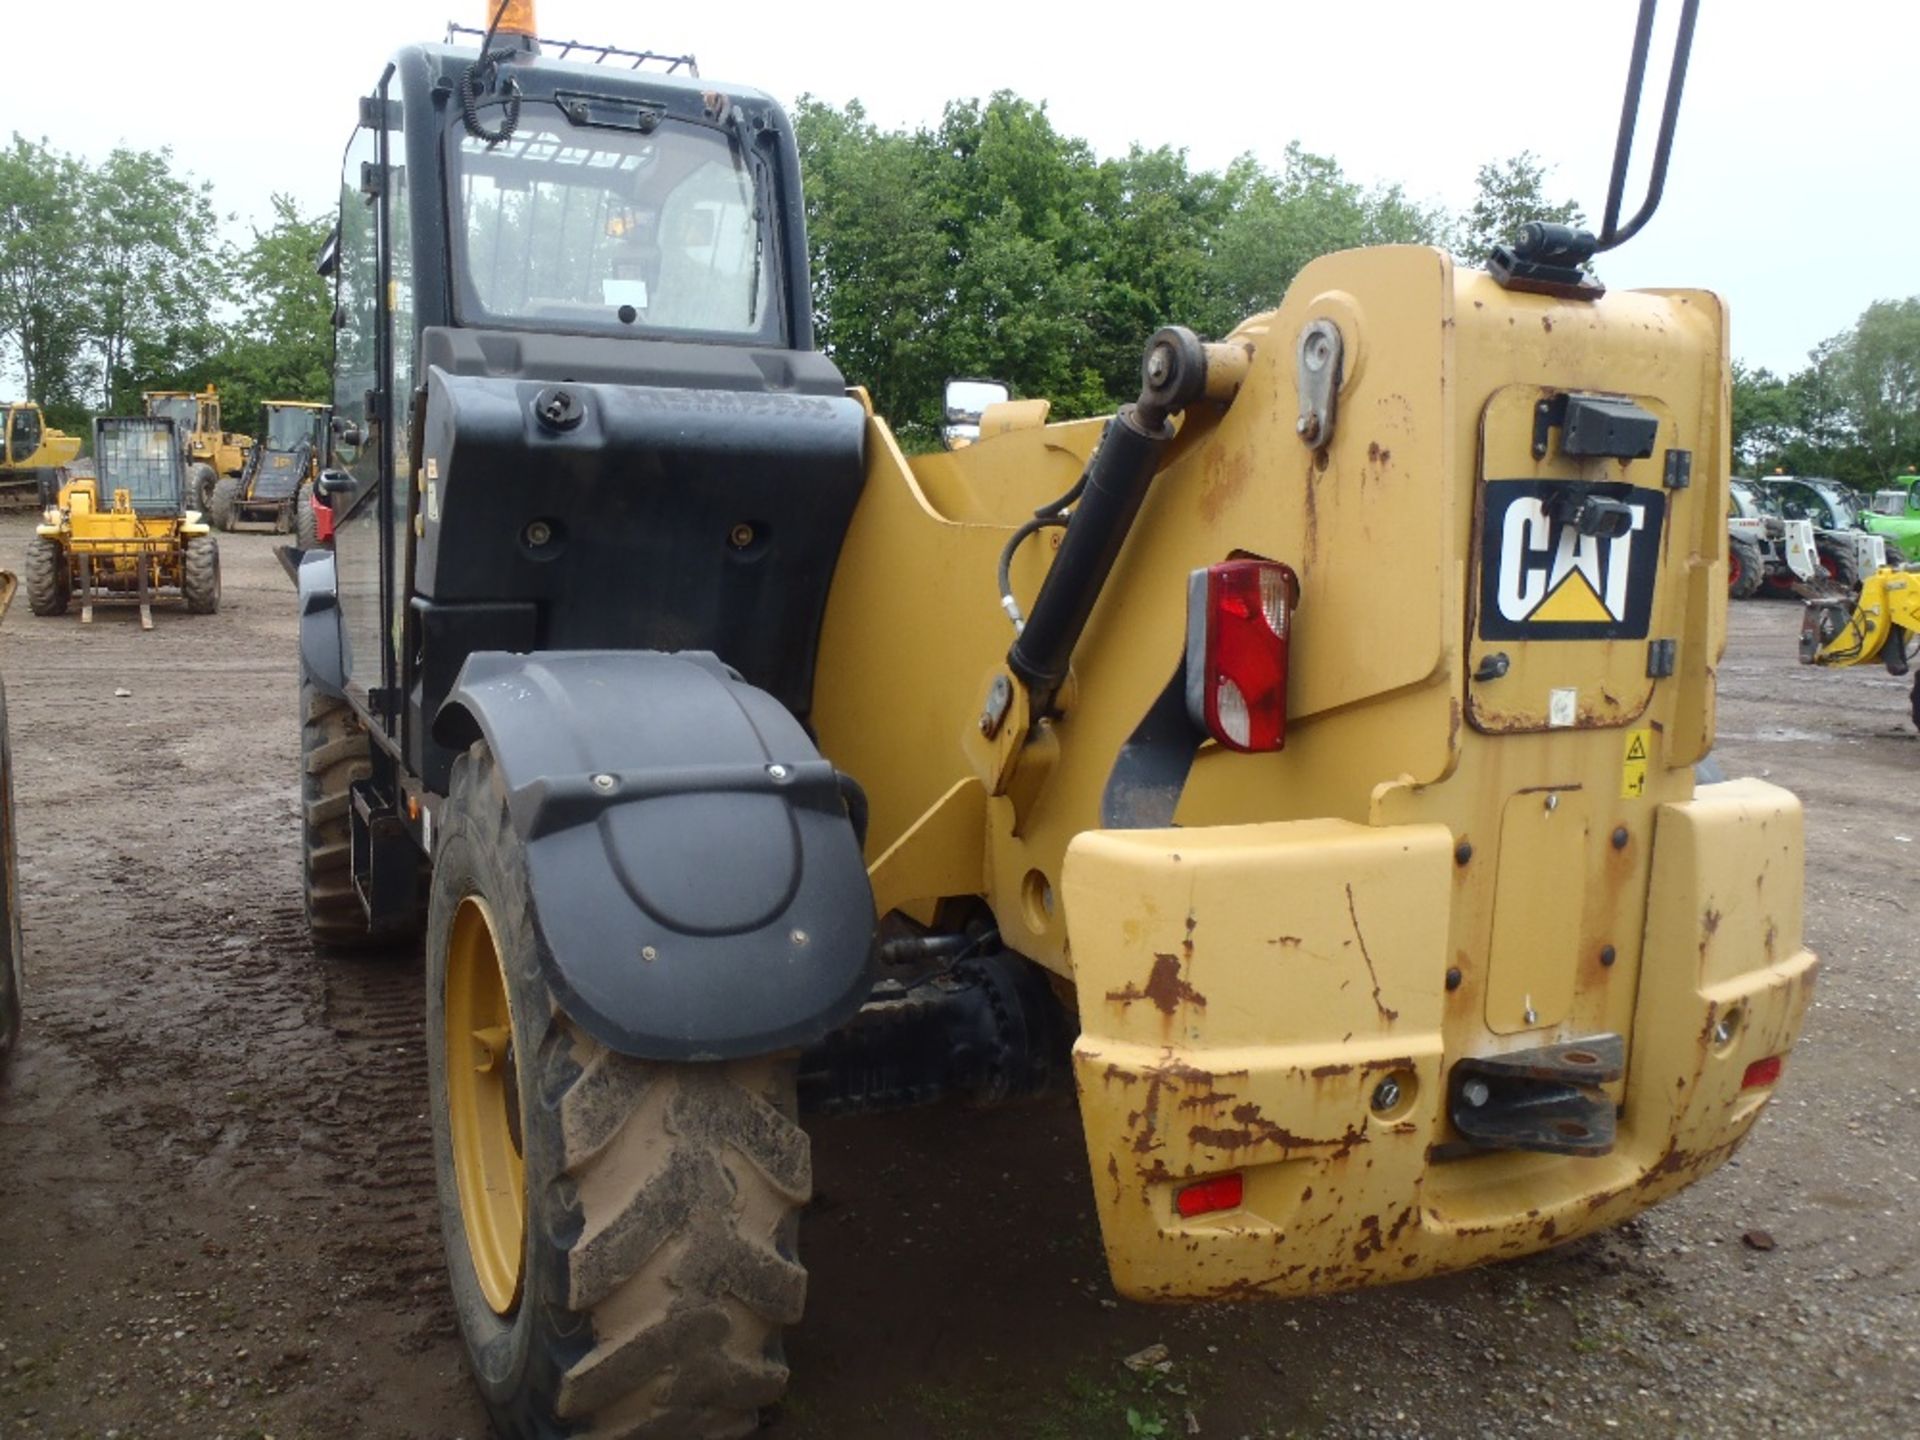 Caterpillar TH414 14m Telehandler. New set switches in office Ser. No. YC5000000TBZ00120 - Image 4 of 5